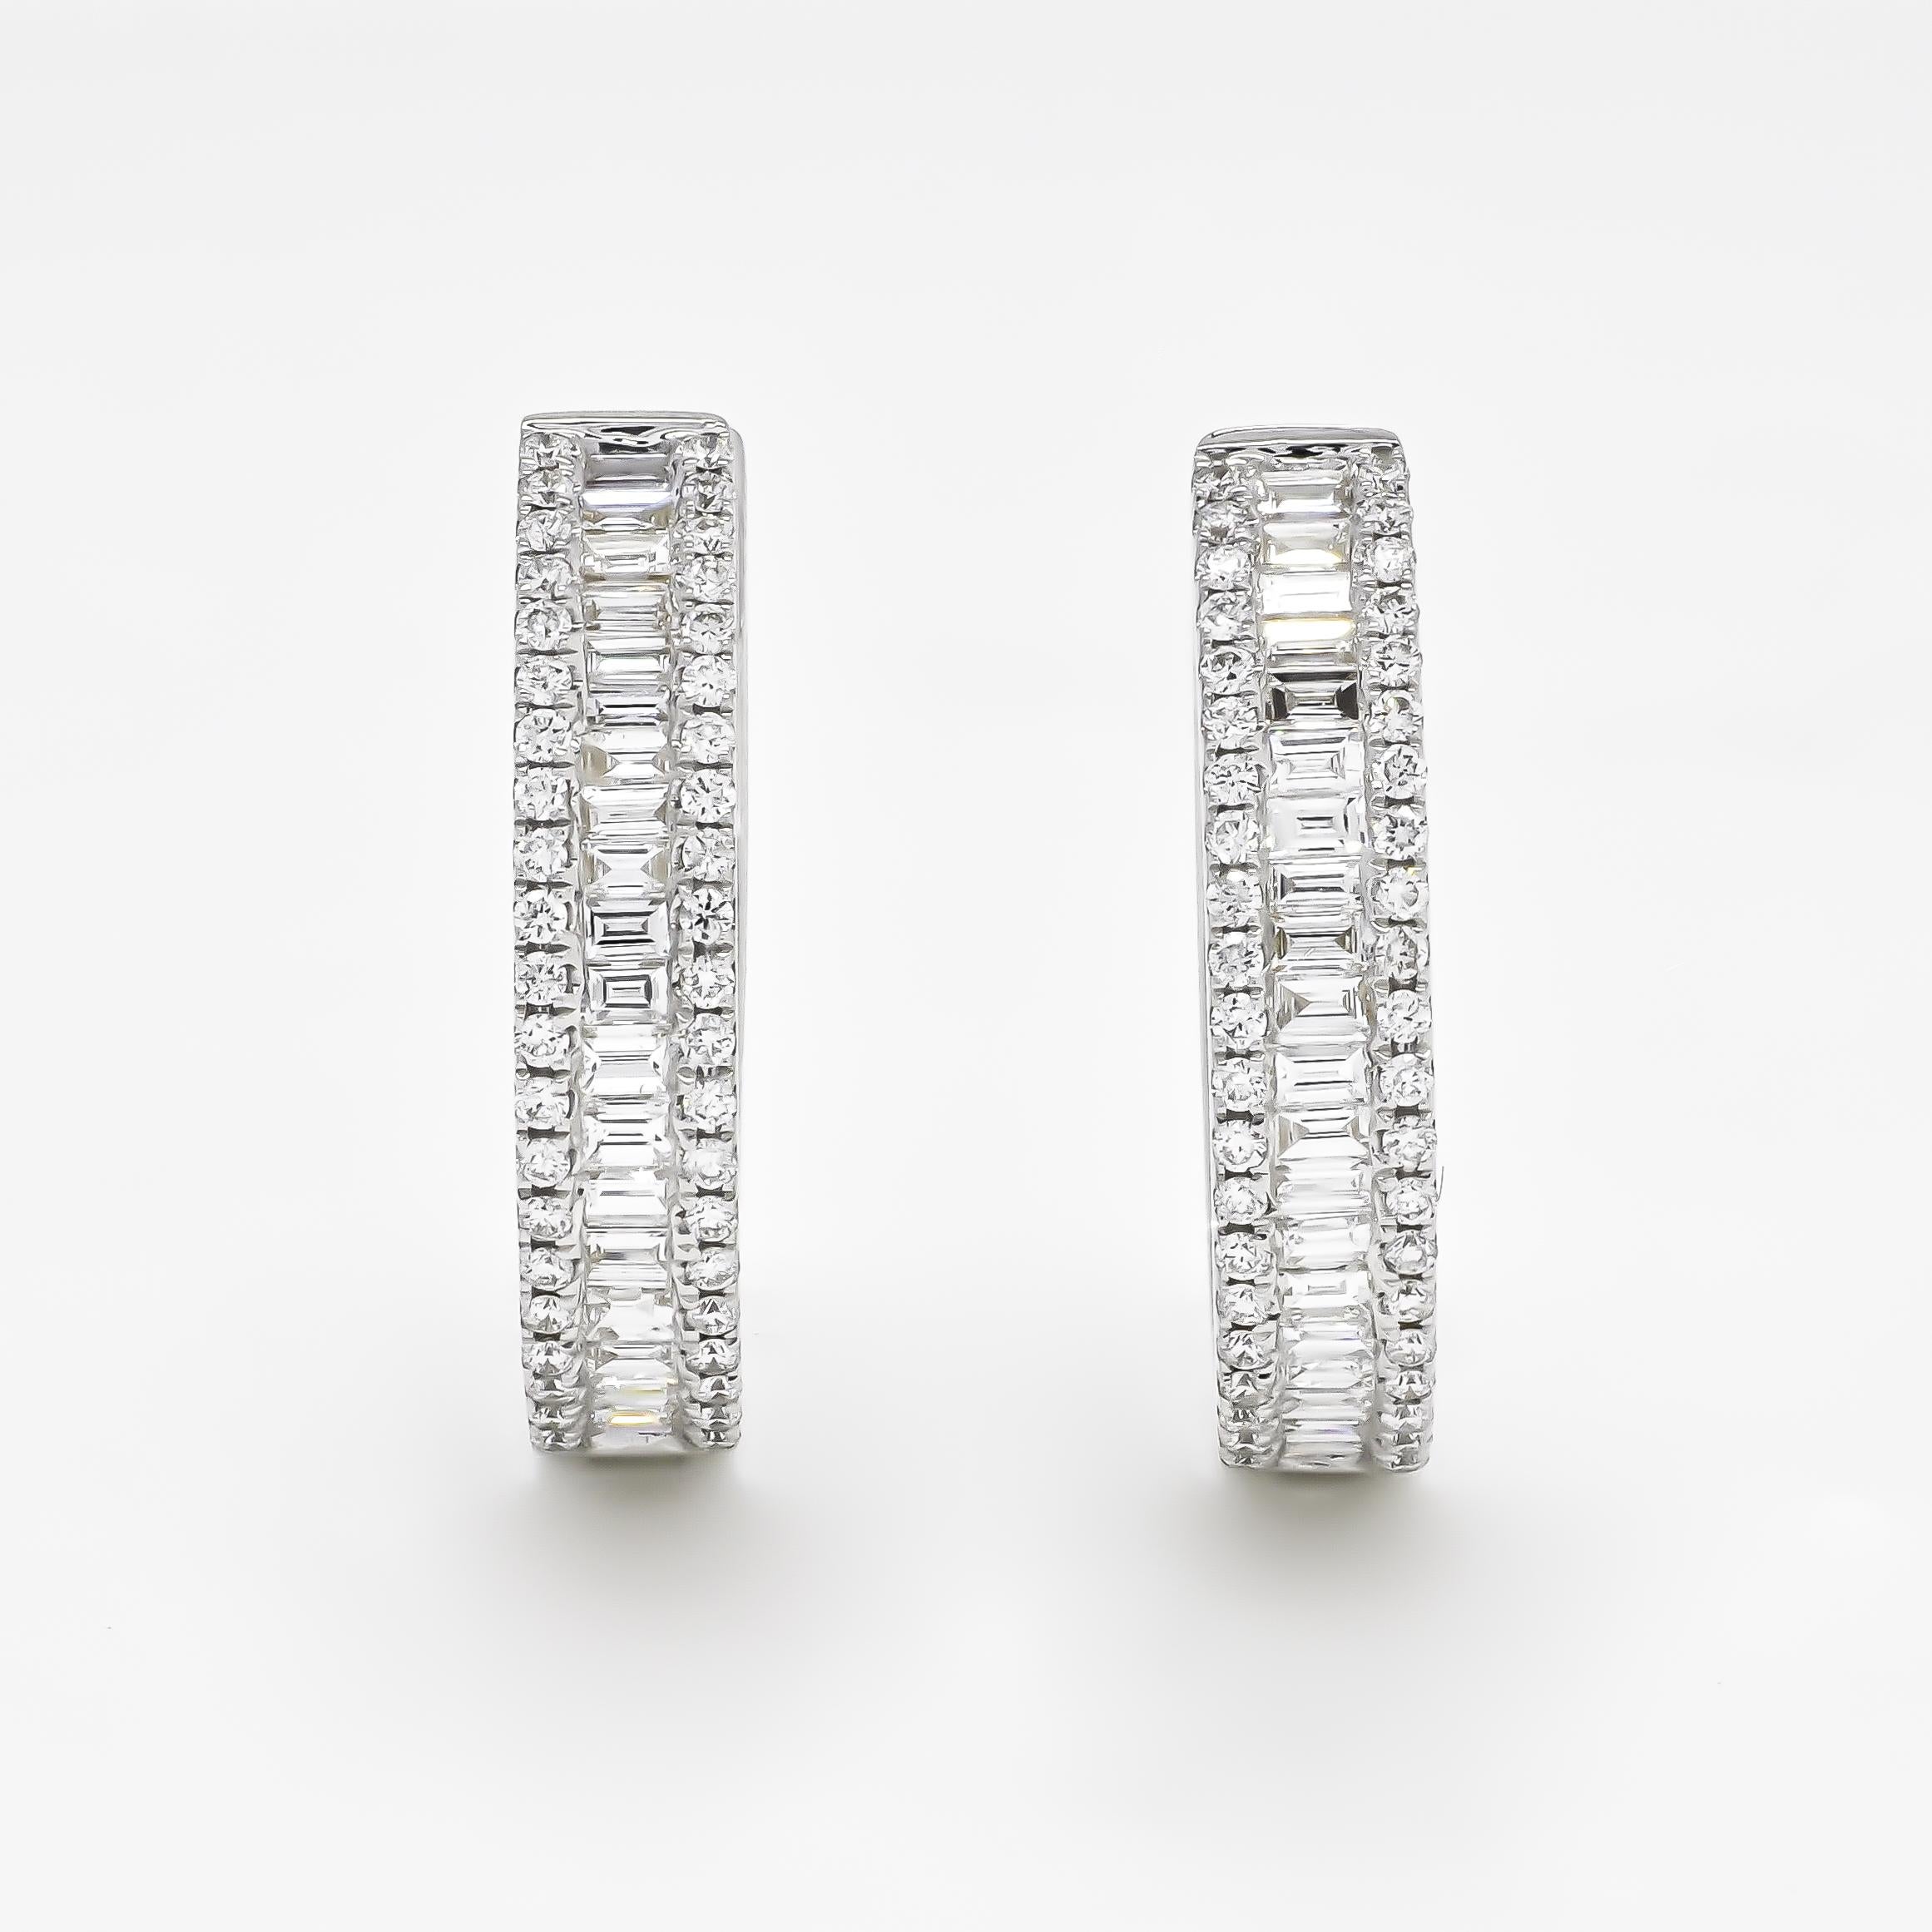 An Elegant 18 KT  Hoop earring gives a dainty look! 

Take her breath away with the bold baguette shine of these exquisite hoop earrings bordered by the gorgeous shimmer of round-shape accent diamonds. Accessorize with elegance. These stunning hoop